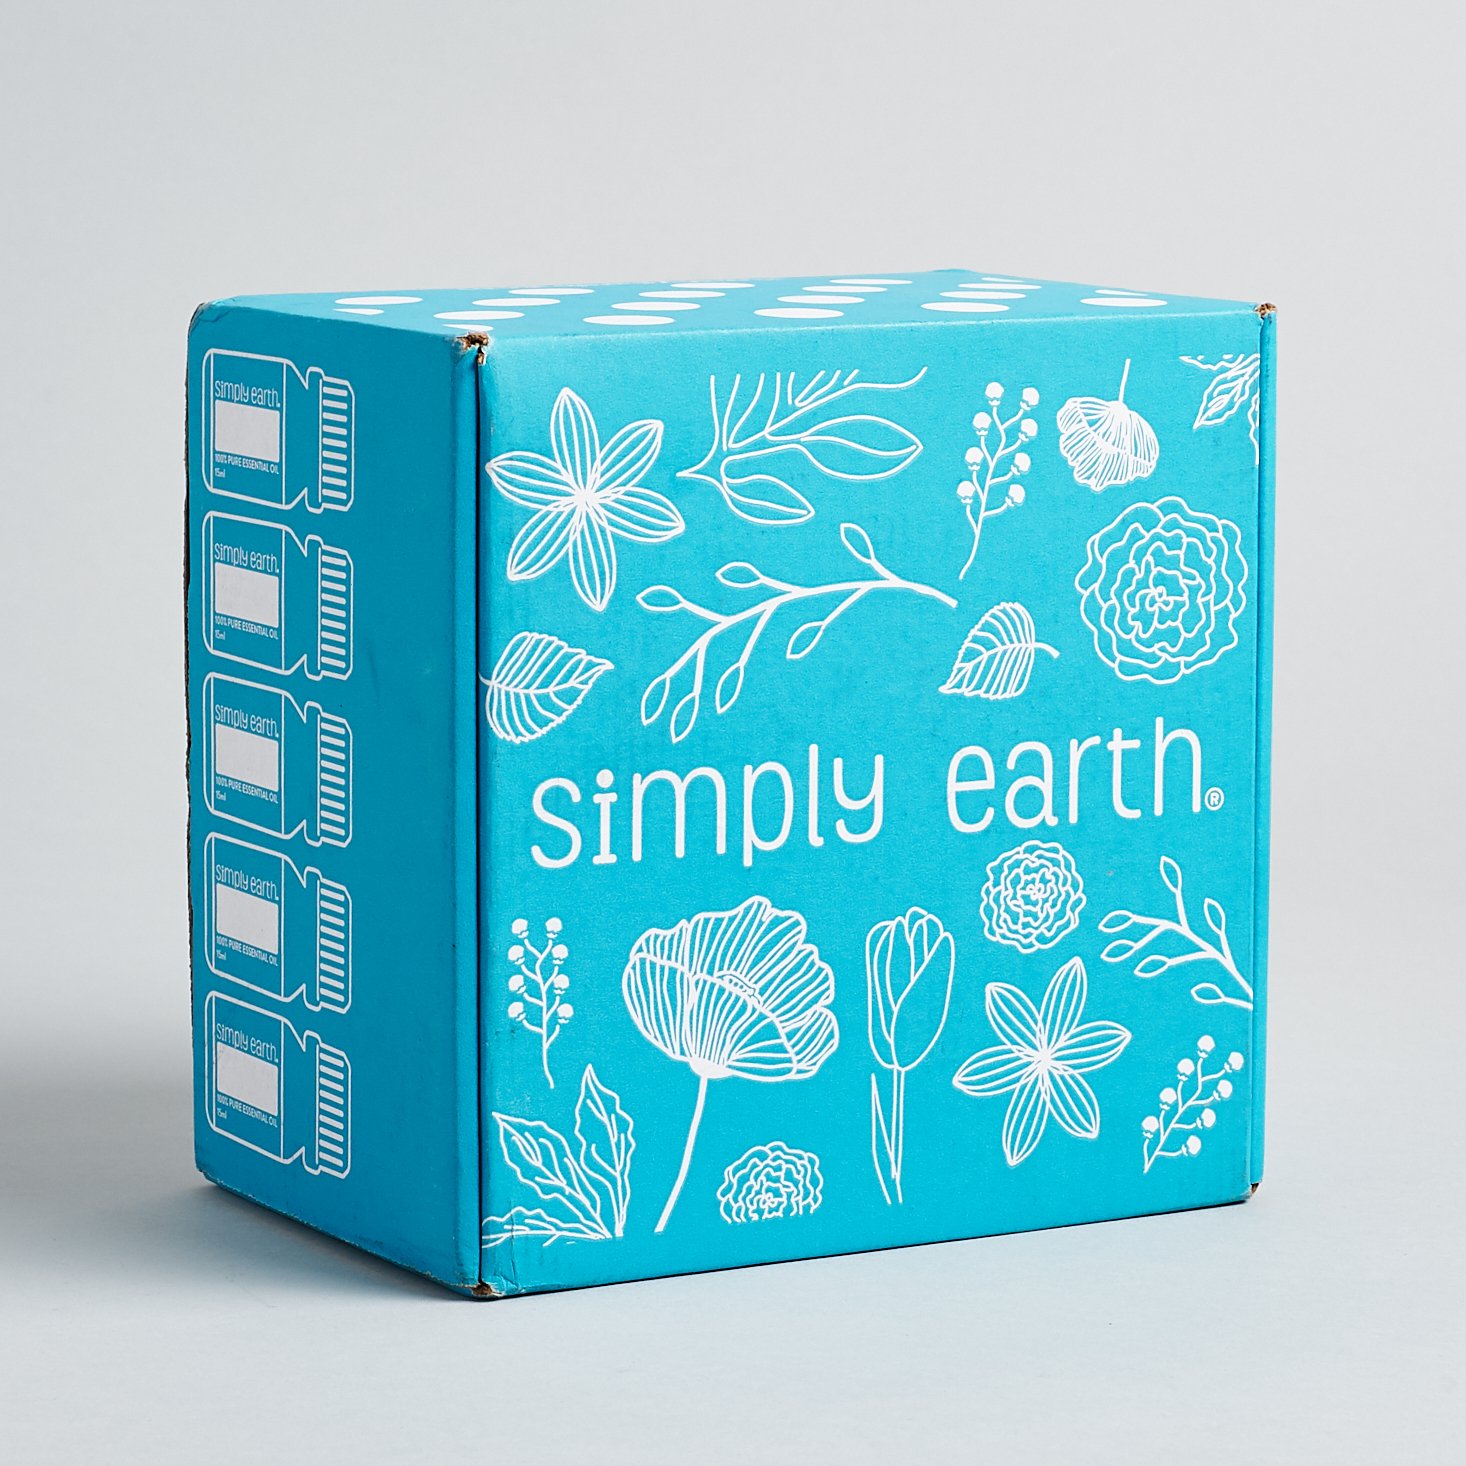 Simply Earth Essential Oil Recipe Box Review + Coupon – September 2019